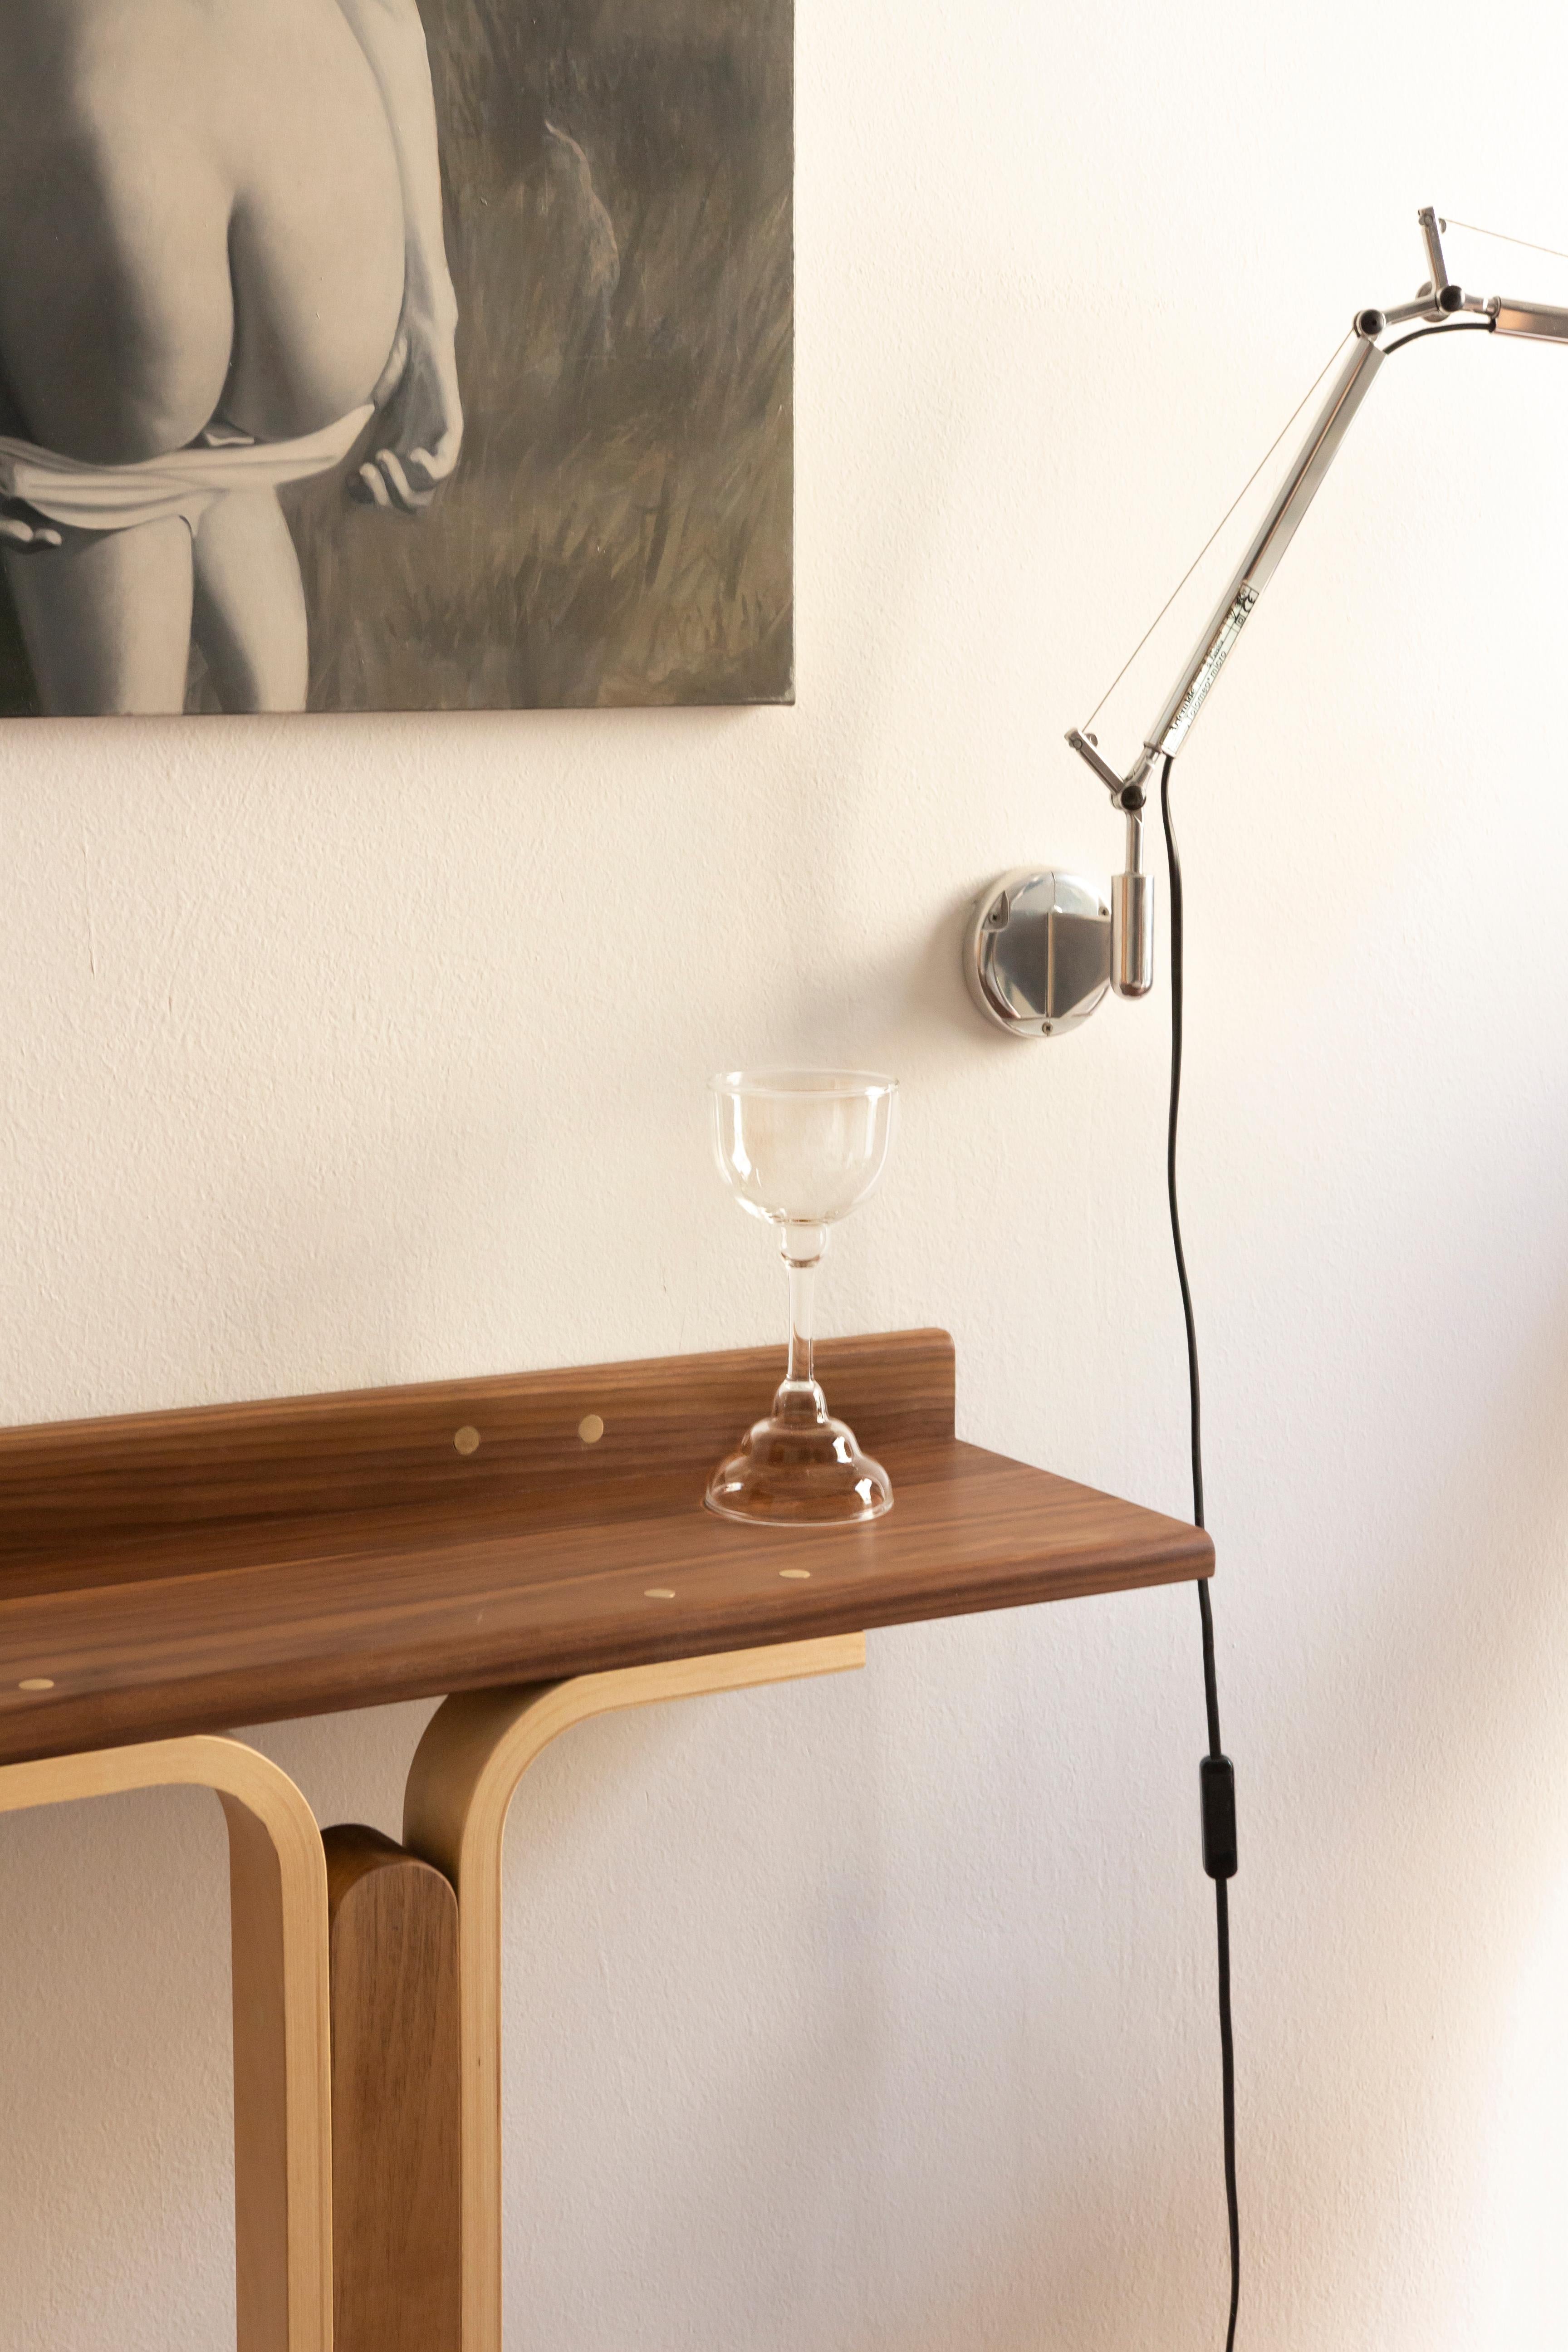 Brass 21st Century Contemporary Wood Console Table Handmade in Italy by Ilaria Bianchi For Sale